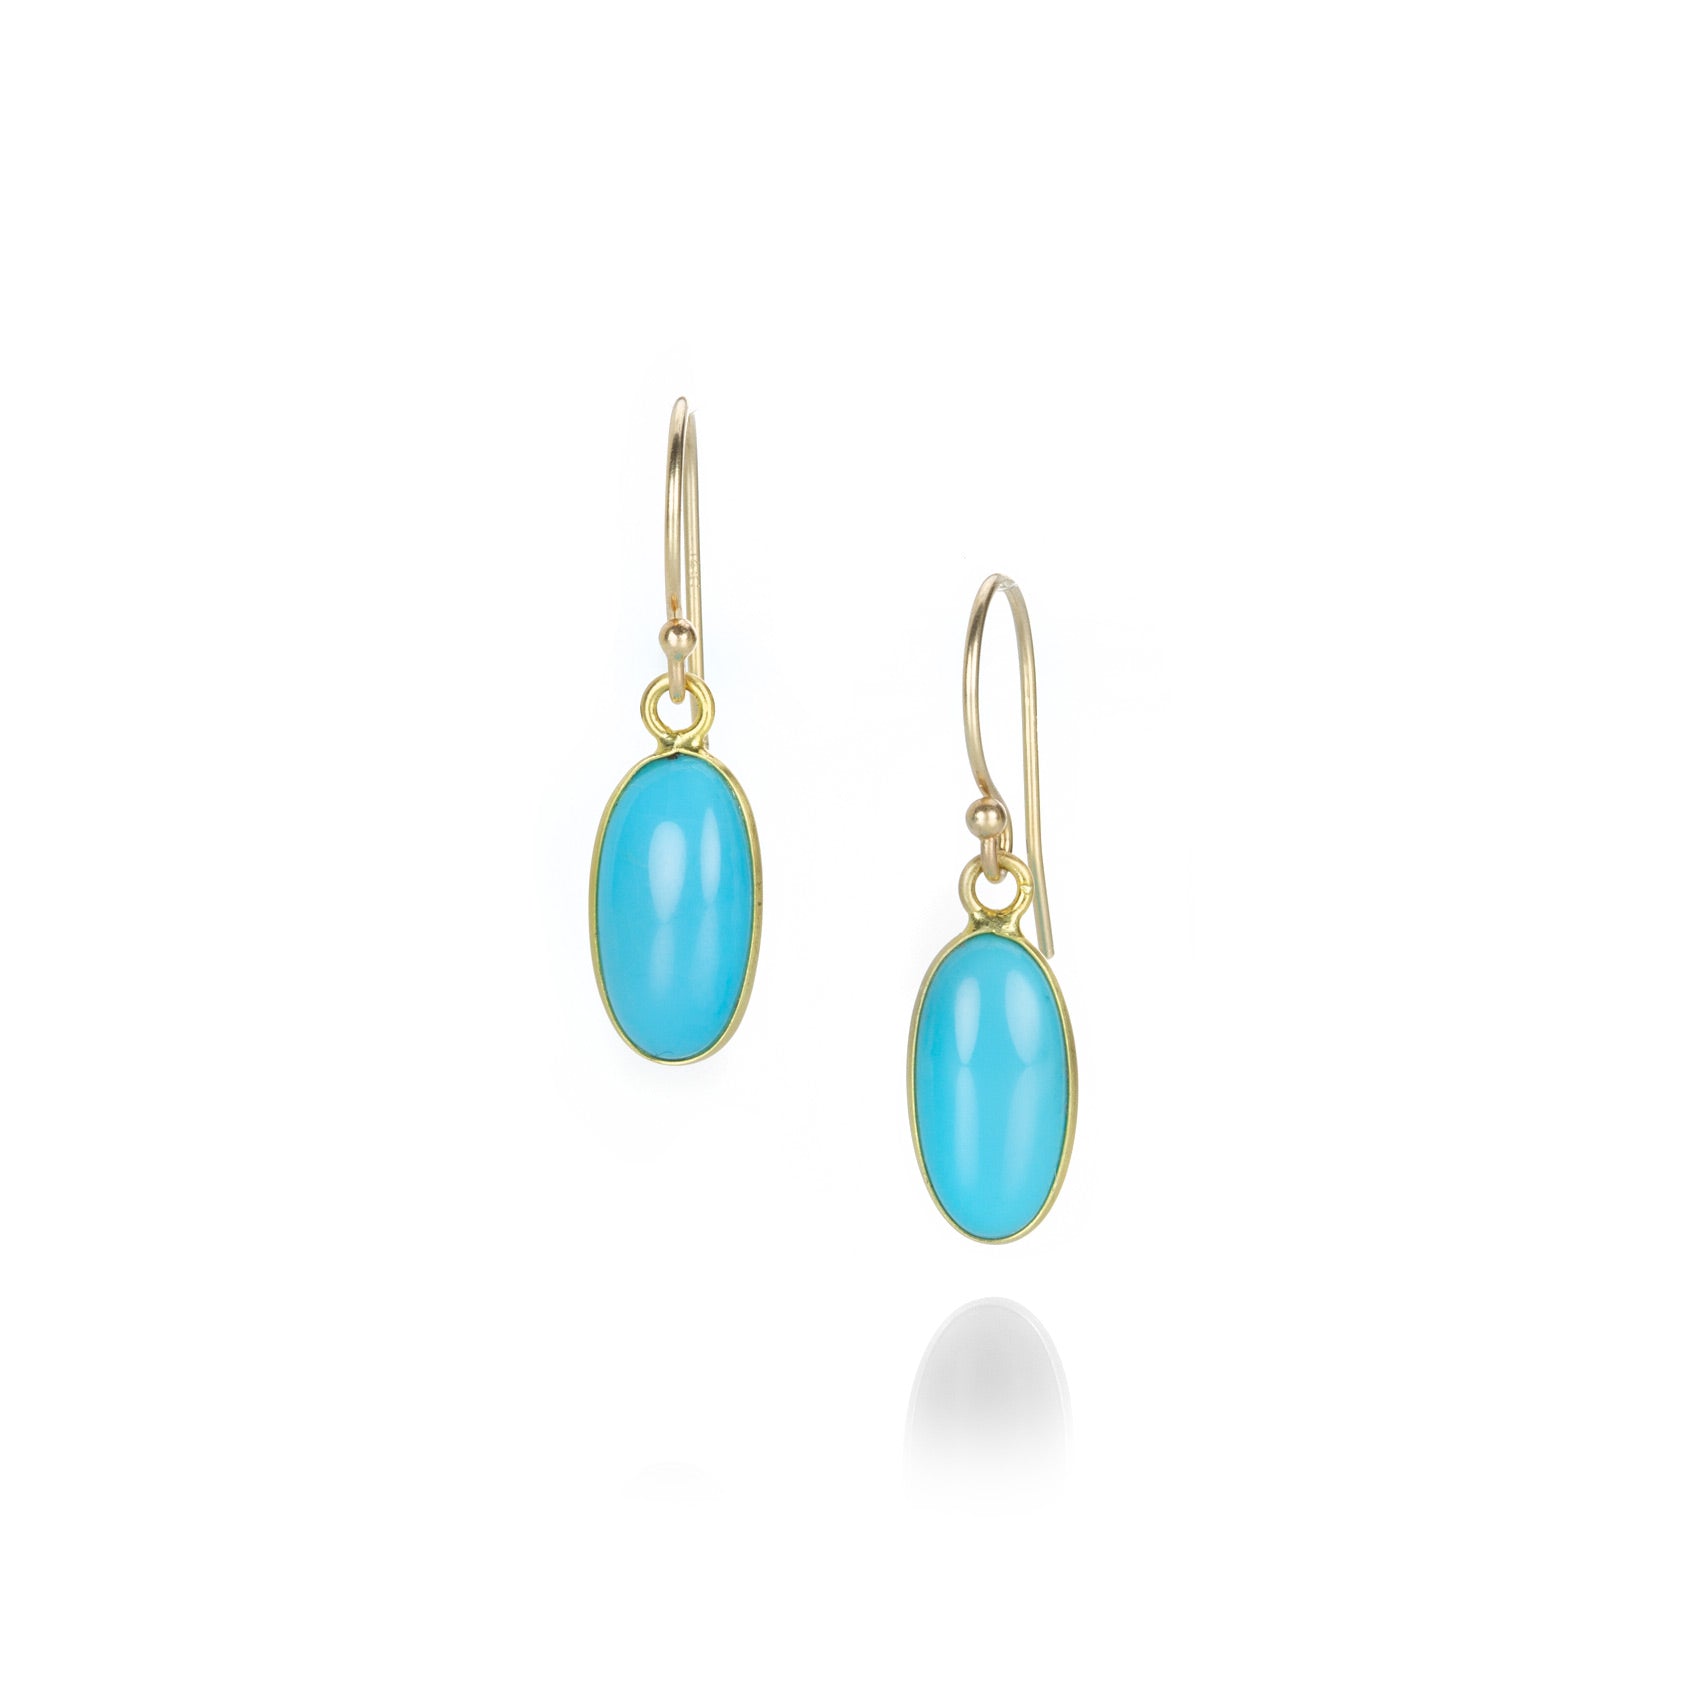 TED MUEHLING 14K & TURQUOISE SMALL RASPBERRY EARRINGS